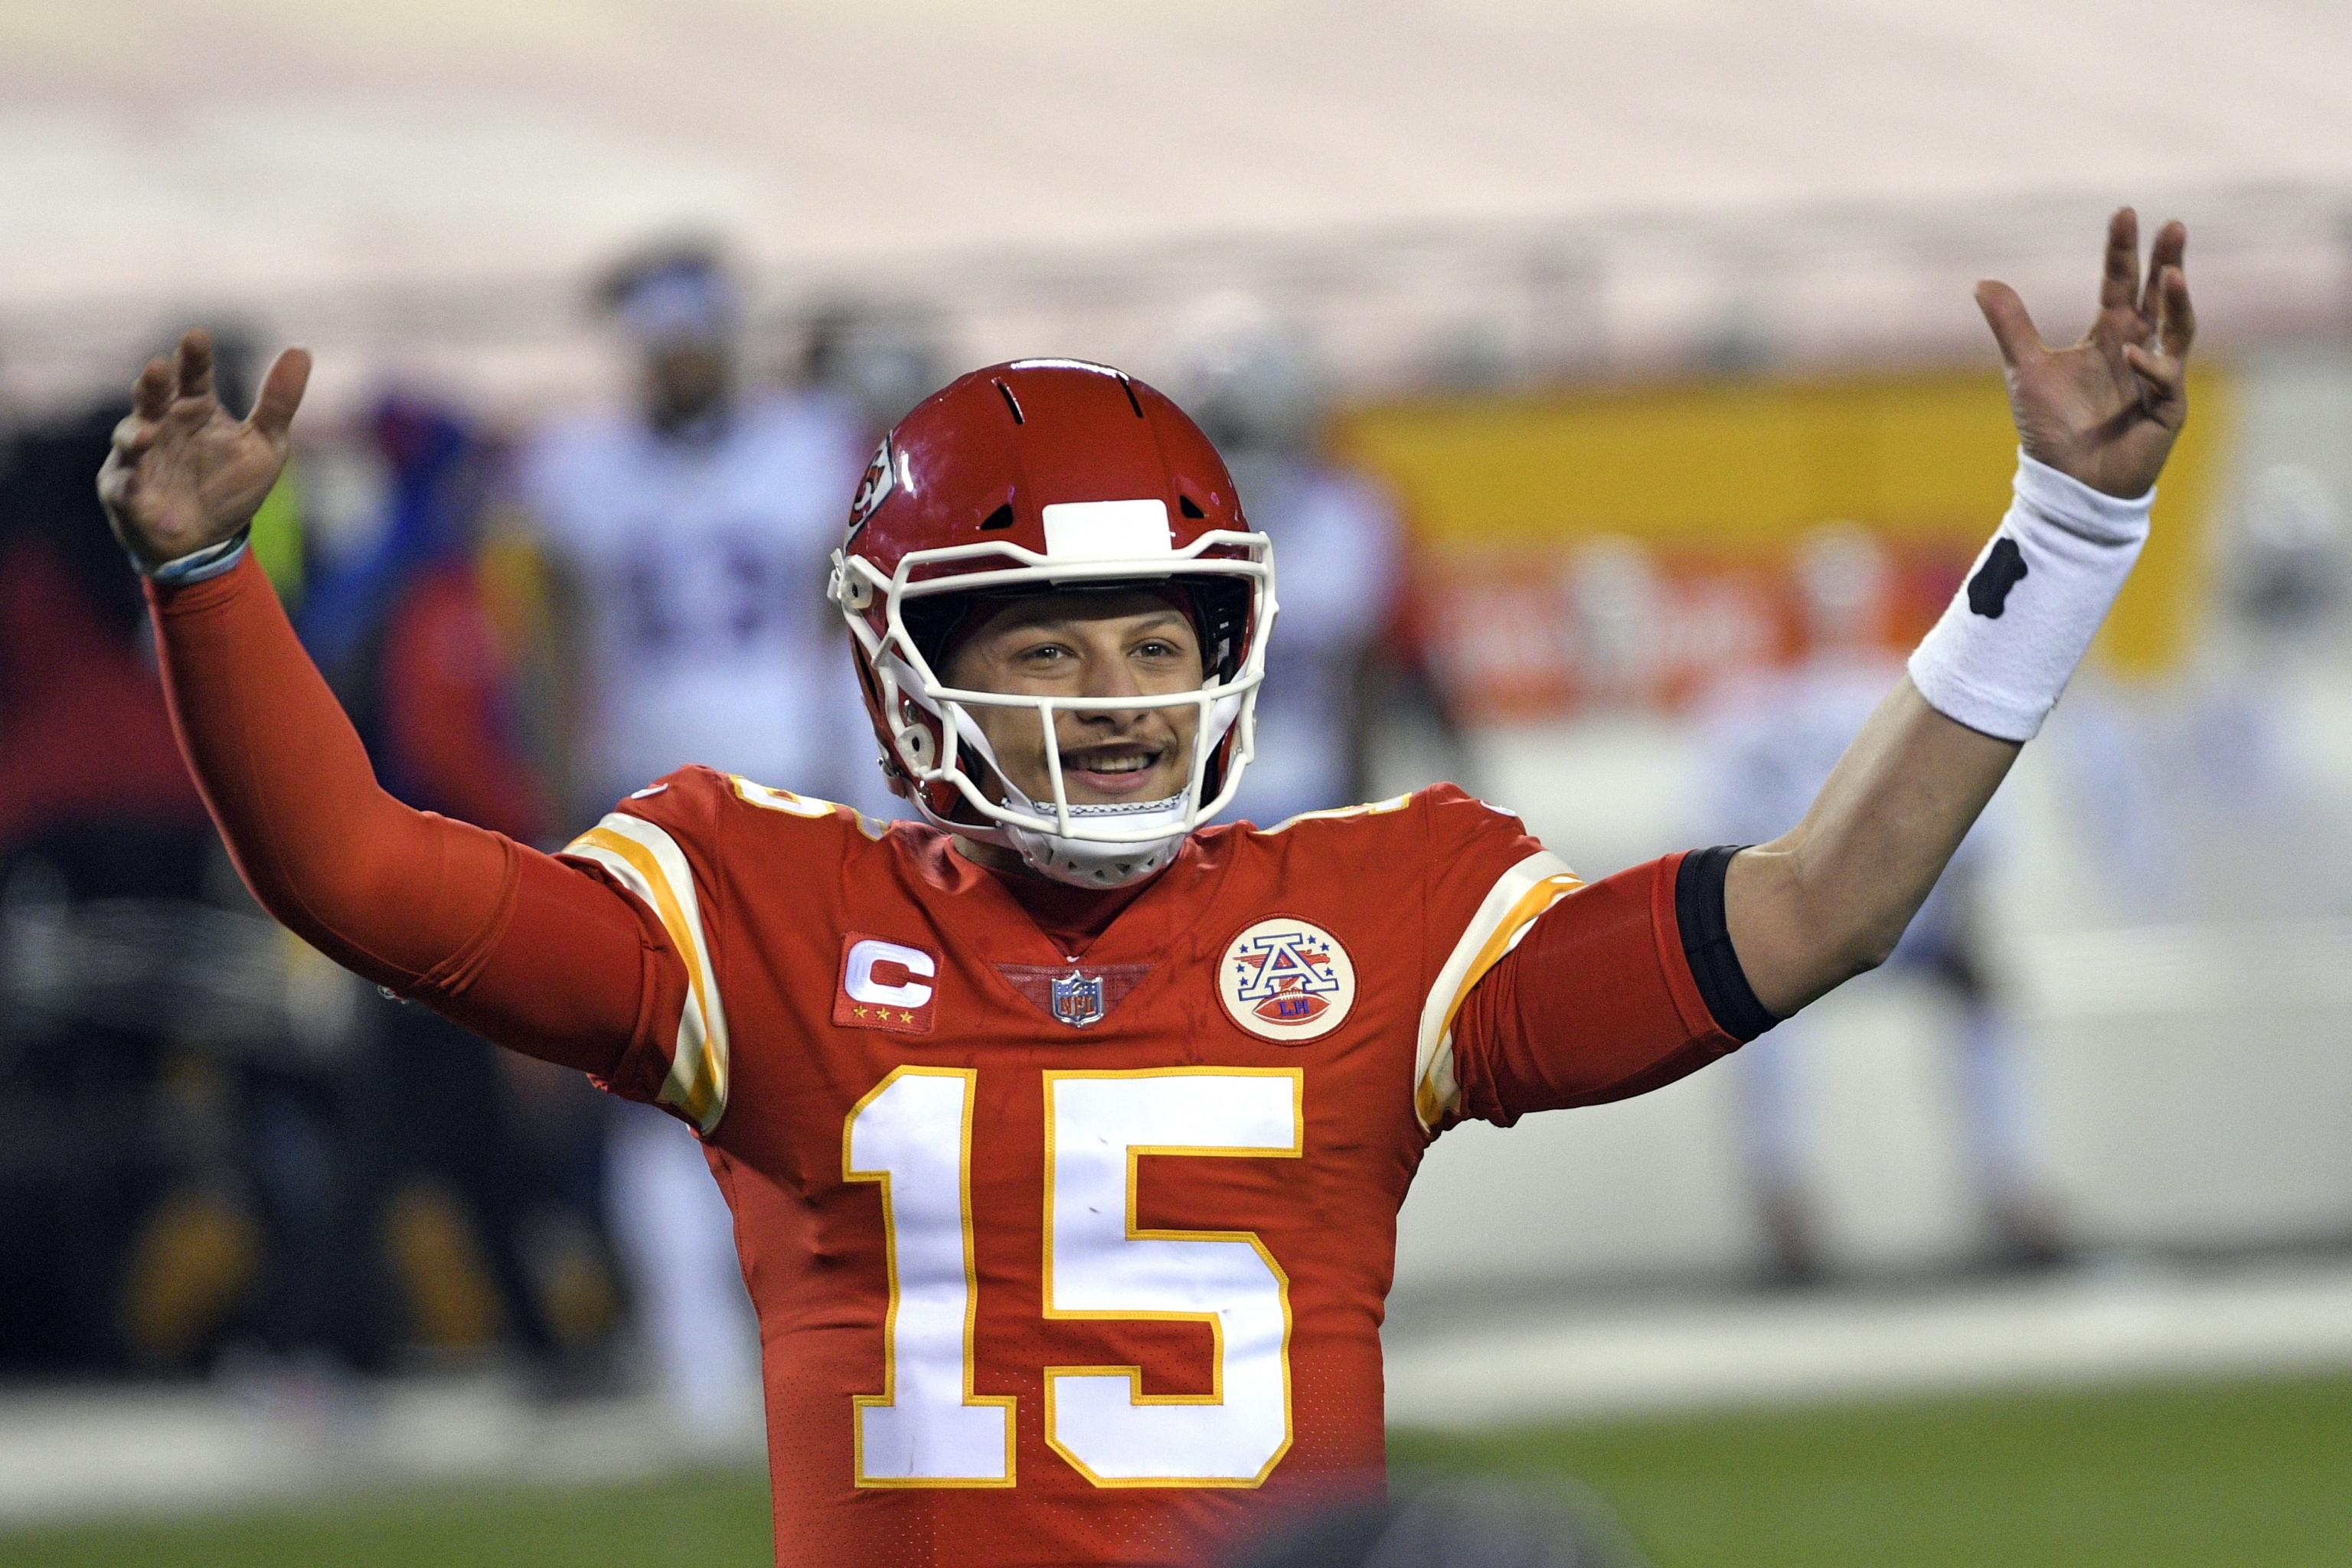 Chiefs star Patrick Mahomes has put KC home up for sale. Take a